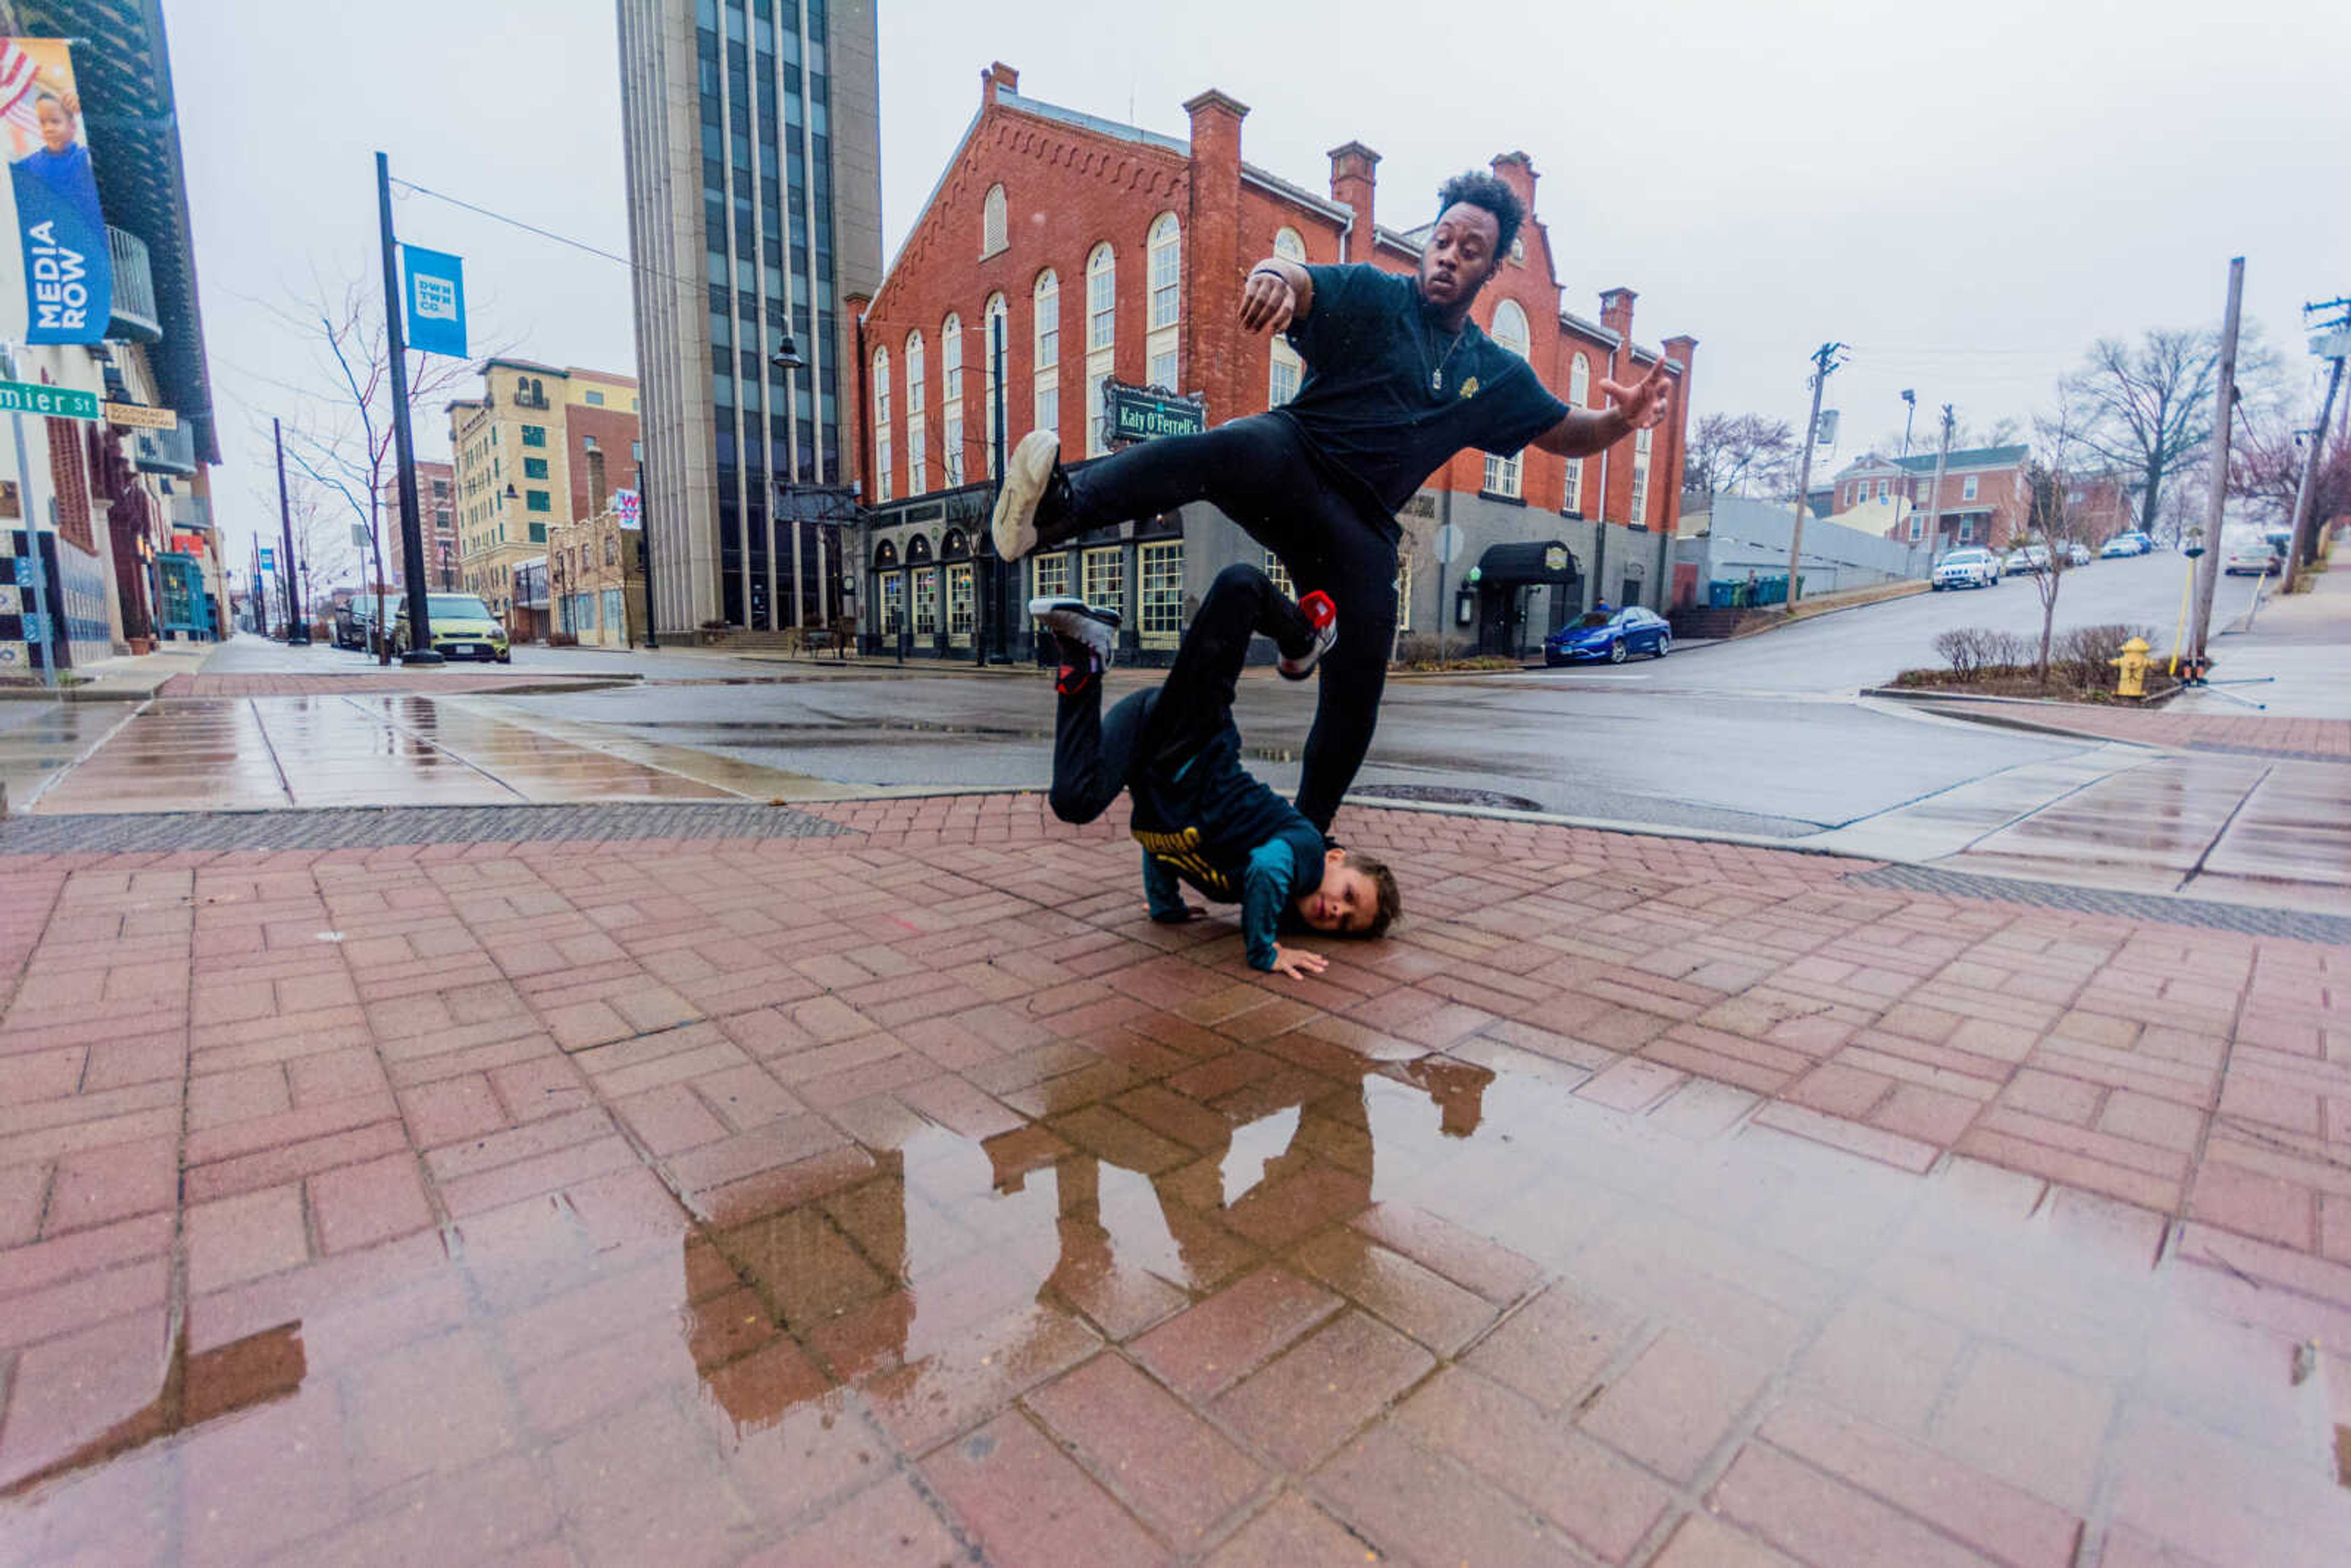 Christopher Guada and Micheal "Crank" Curry dance in downtown Cape Girardeau.